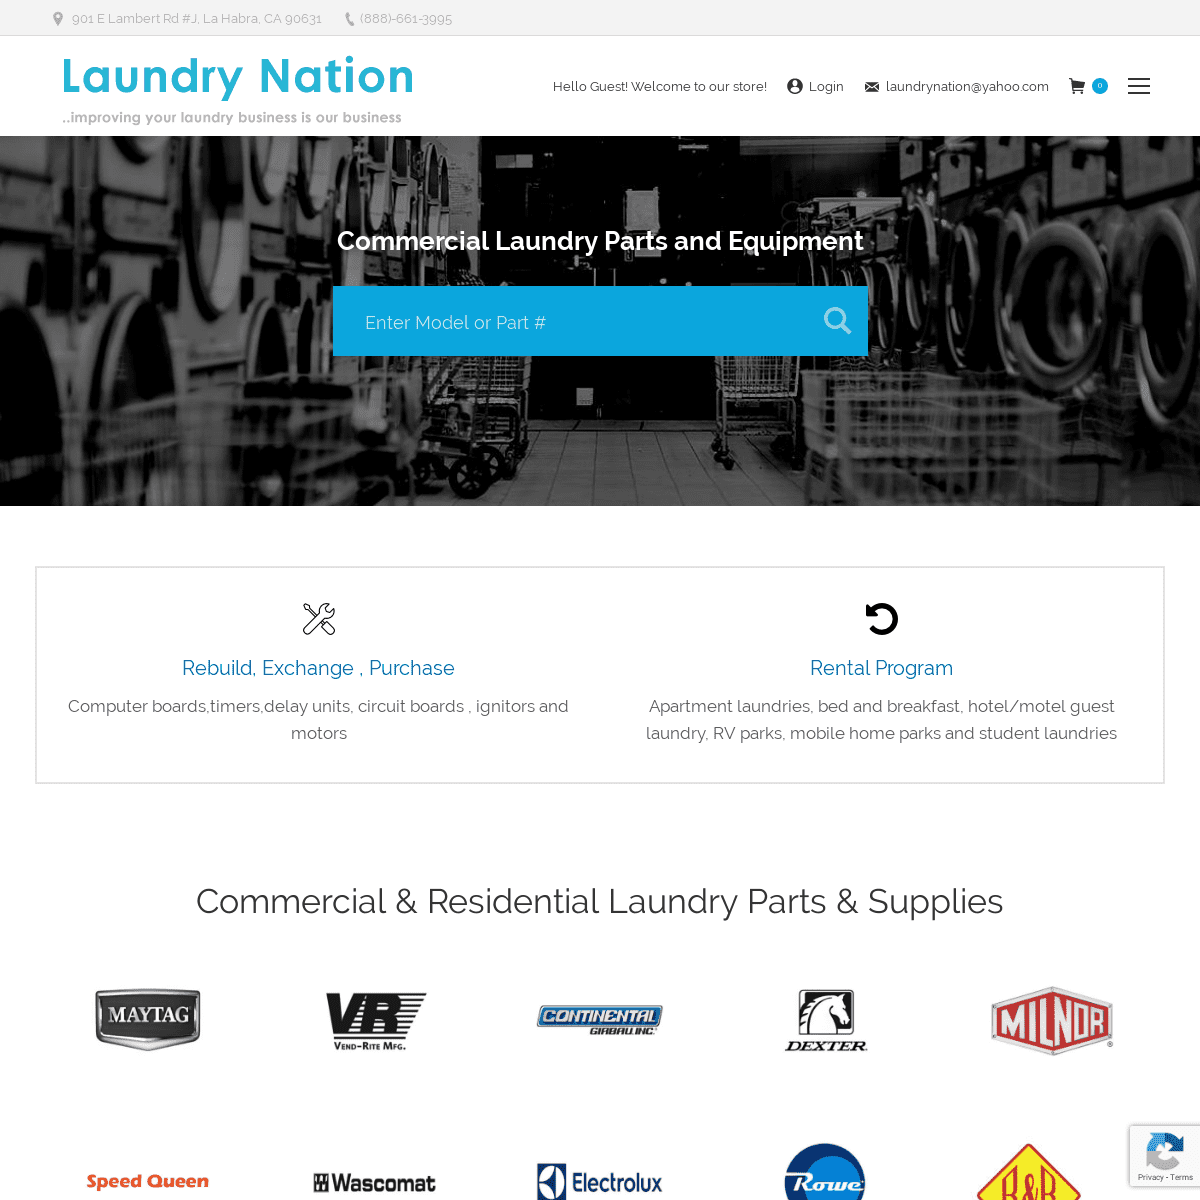 A complete backup of laundrynation.com